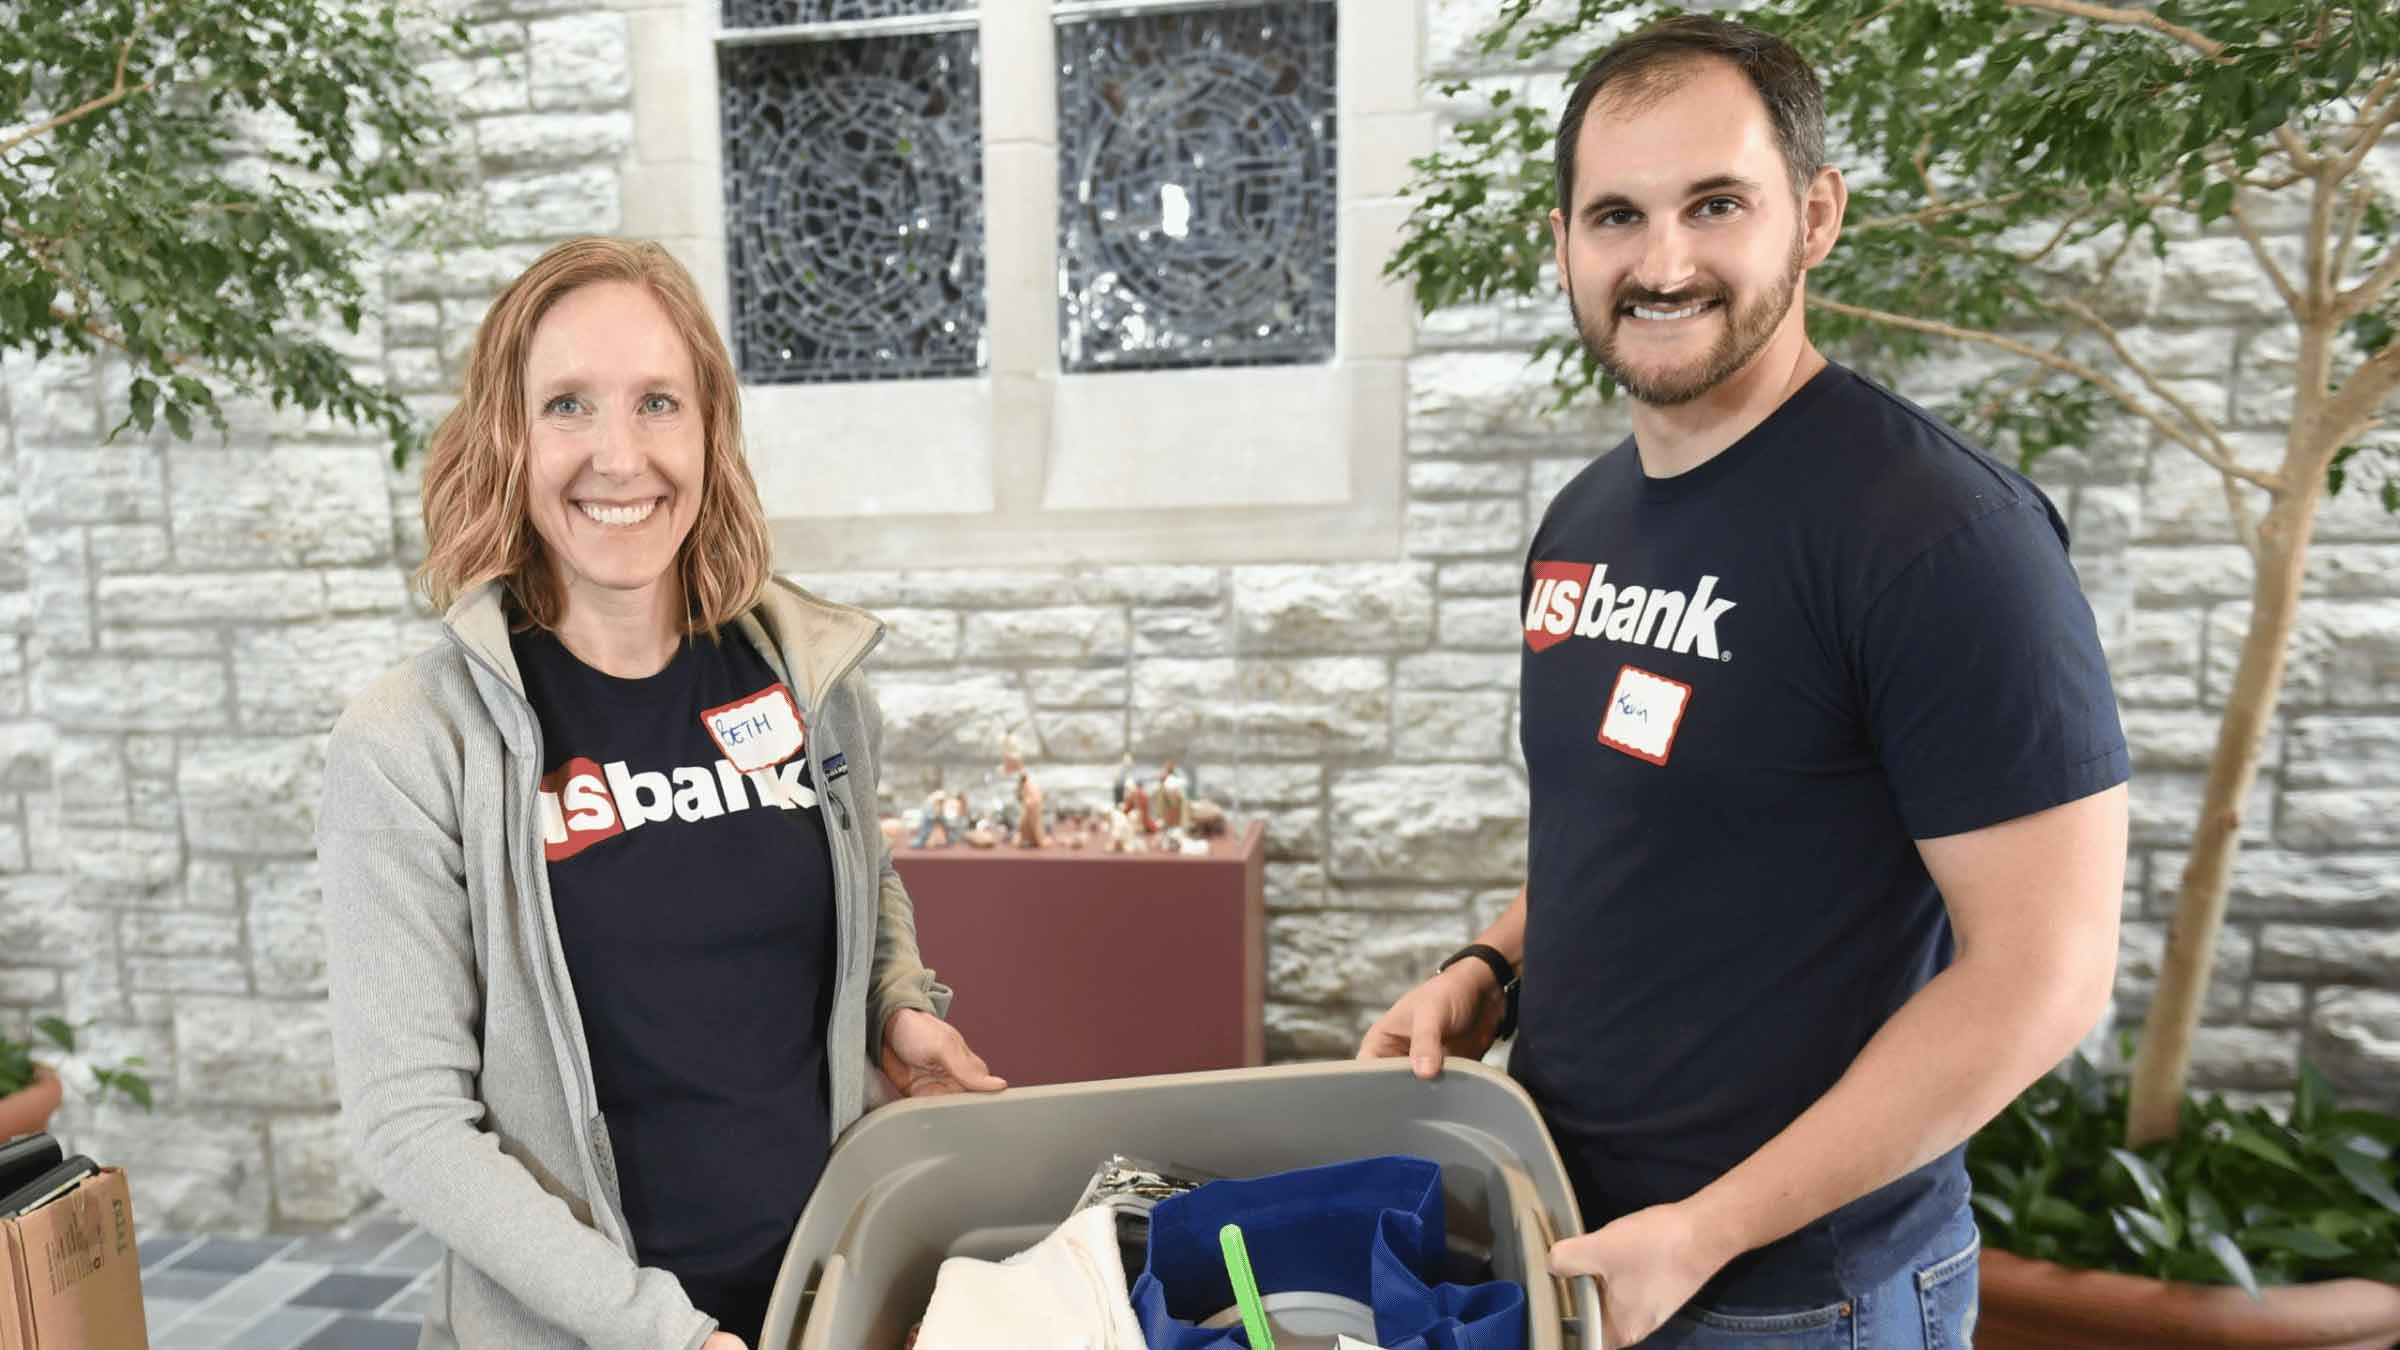 Two volunteers from US Bank hold up a bin filled with supplies